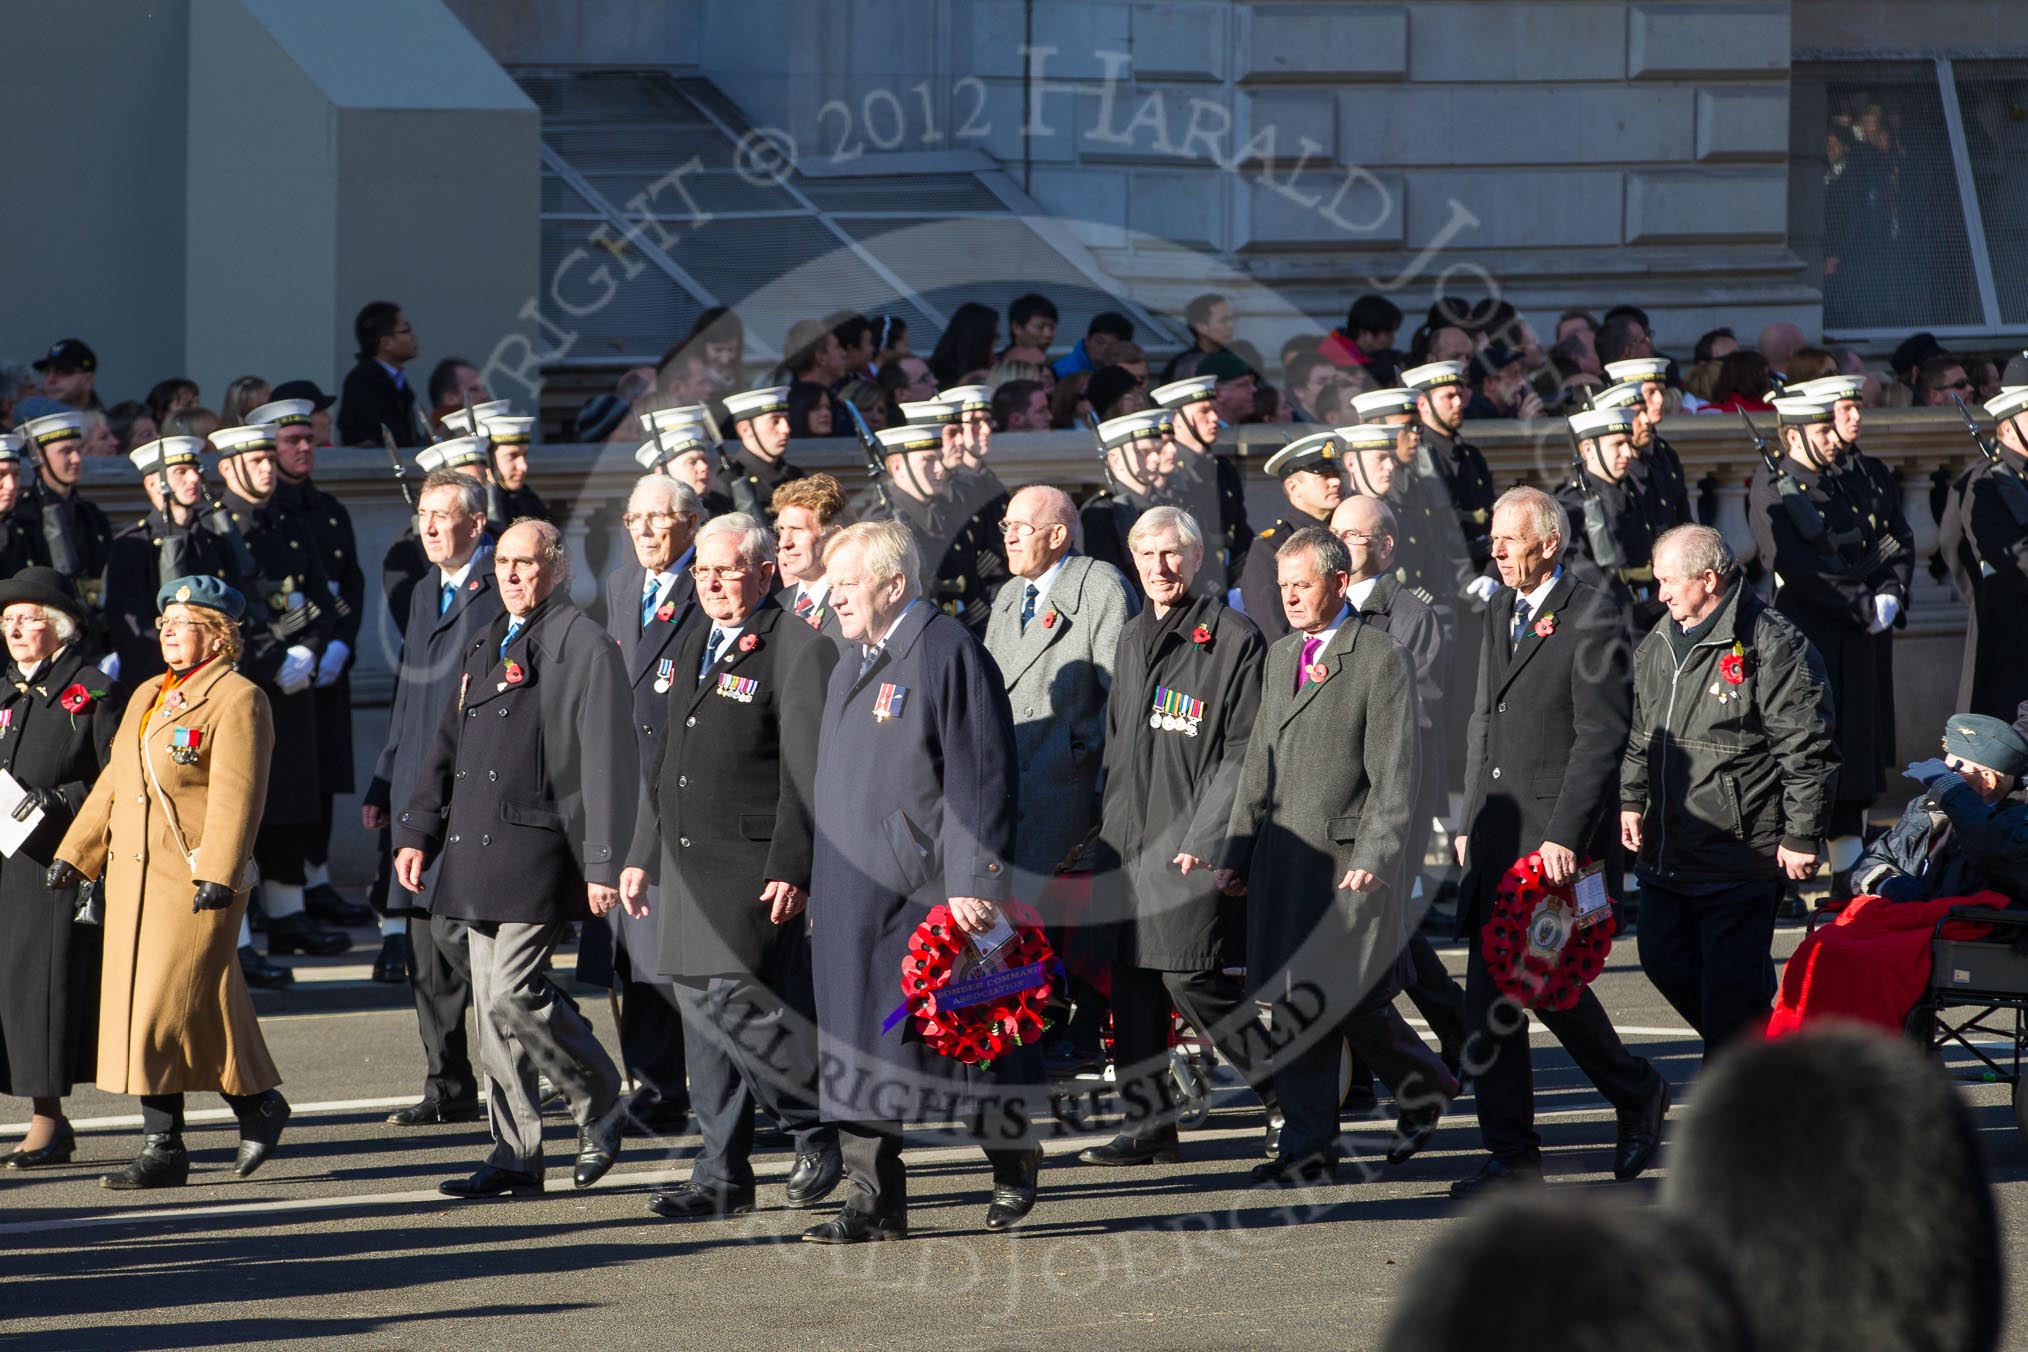 Remembrance Sunday 2012 Cenotaph March Past: Group C14 - Bomber Command Association..
Whitehall, Cenotaph,
London SW1,

United Kingdom,
on 11 November 2012 at 12:02, image #1131